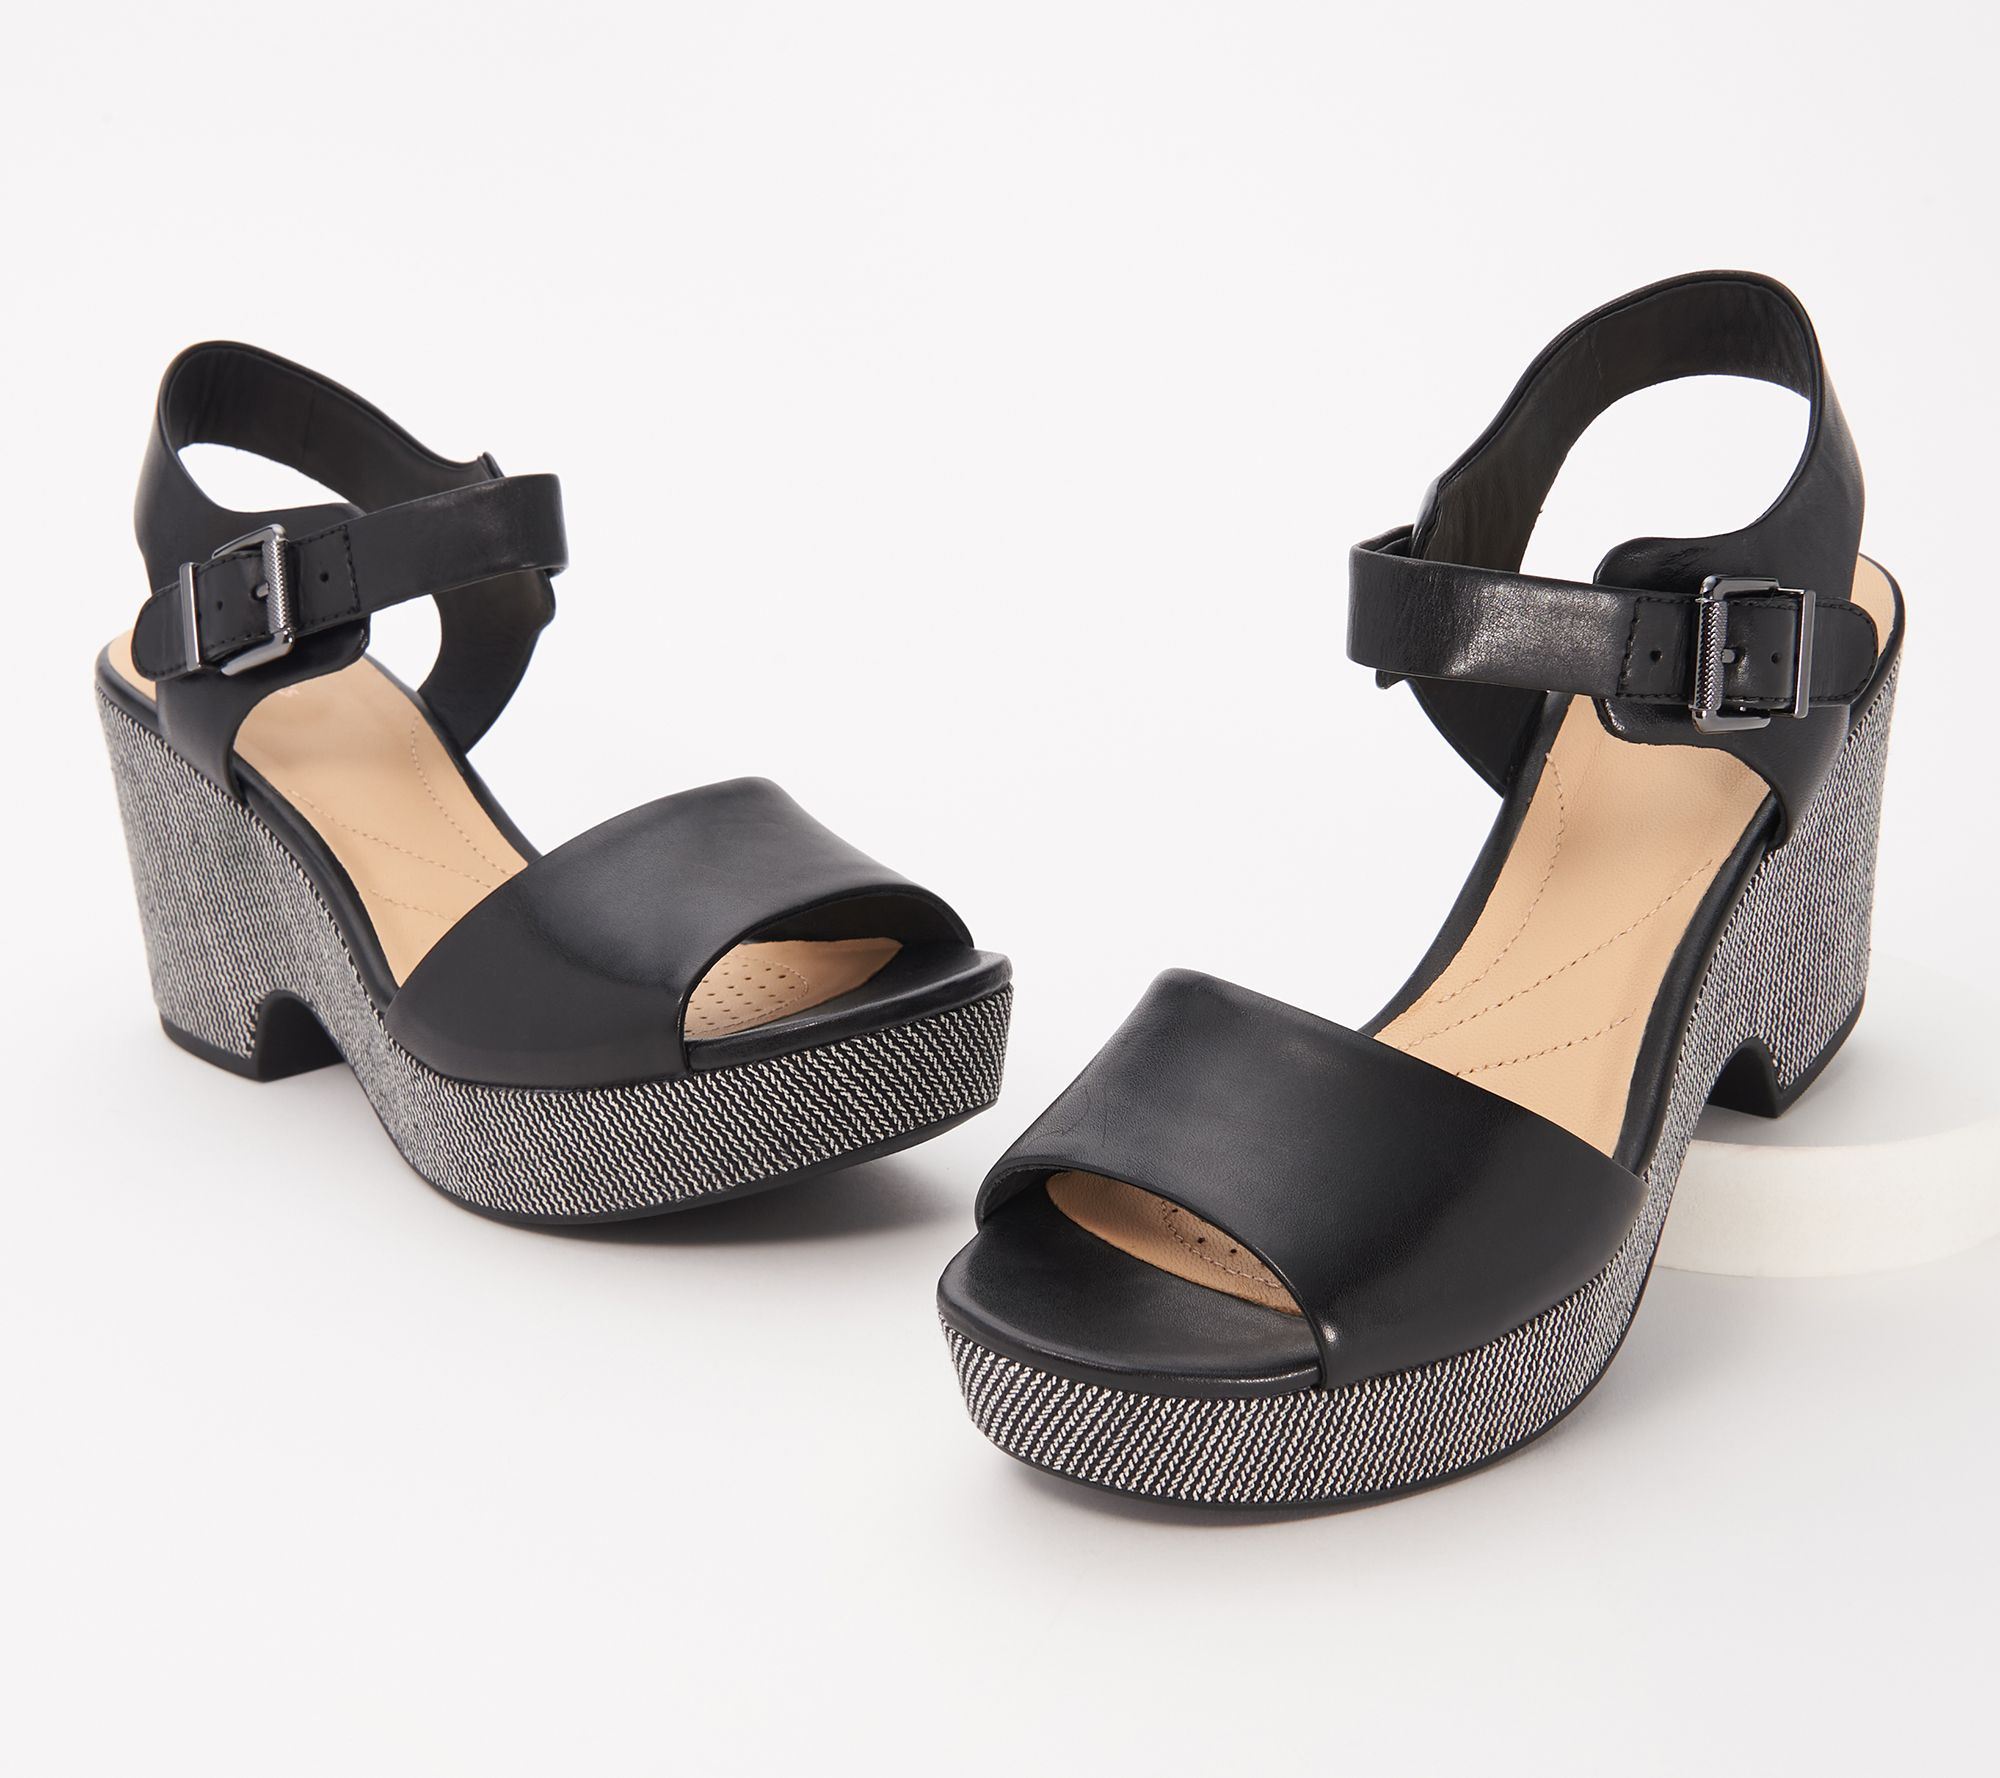 clarks curtain fall strappy sandals